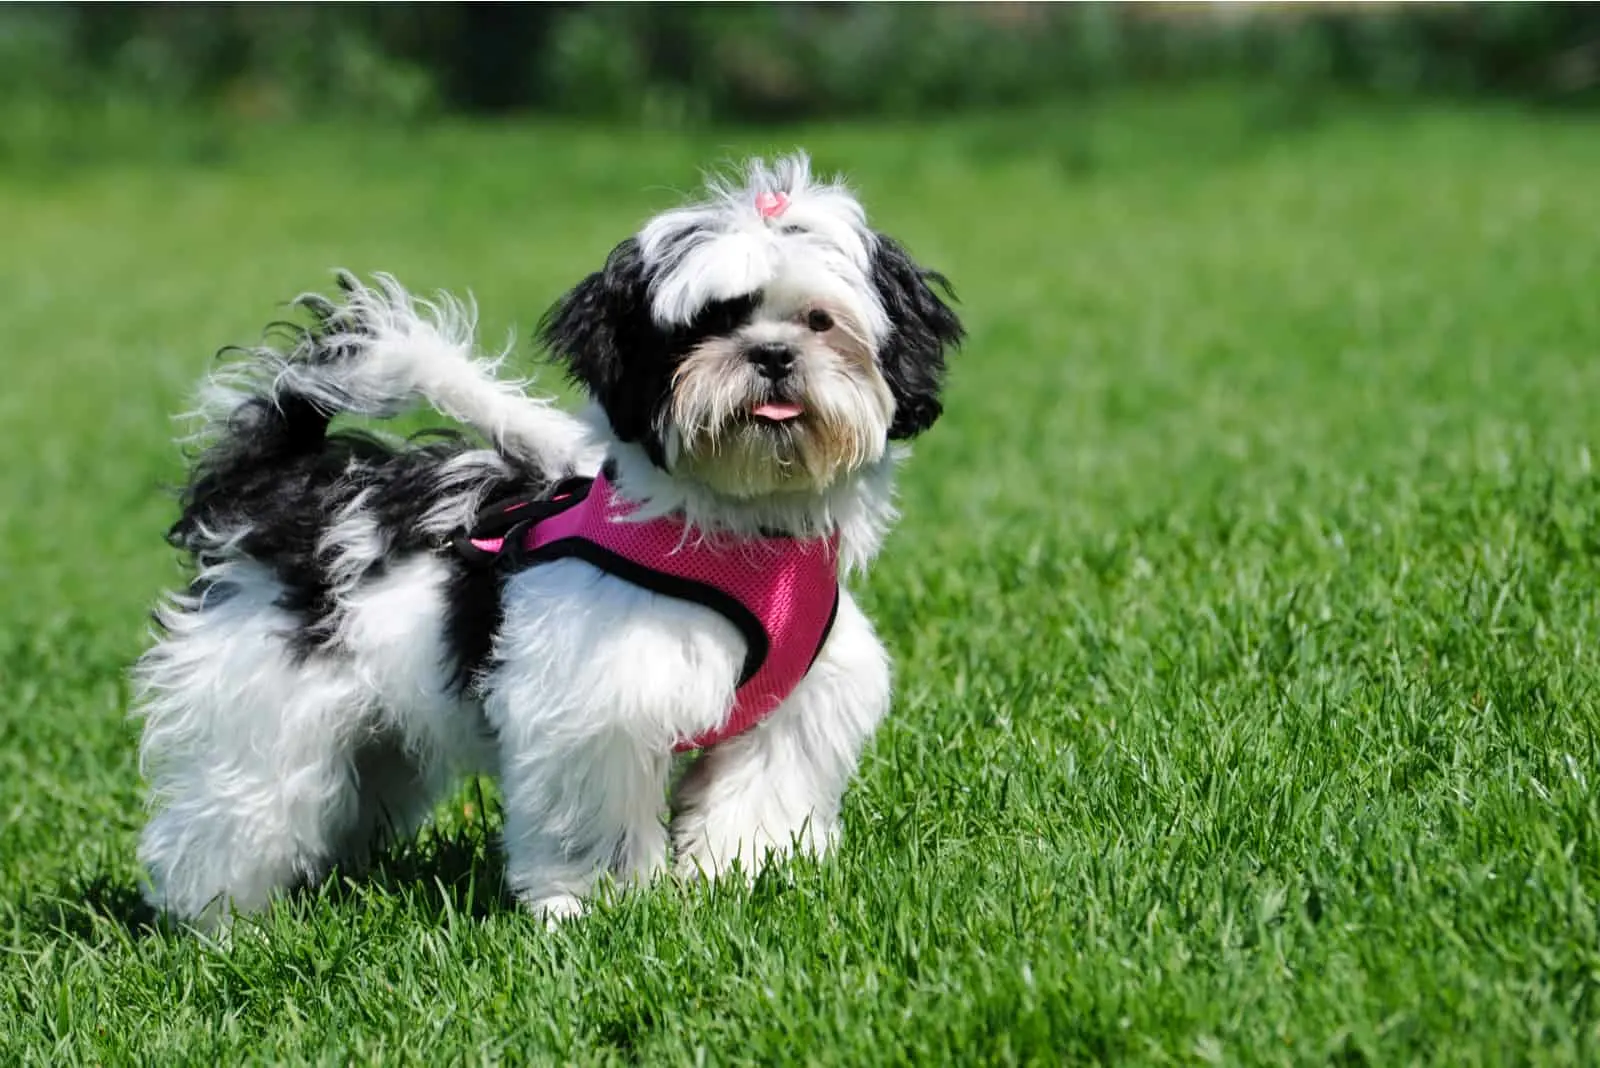 Black and white Shih Tzu puppy wearing her little pink harness 